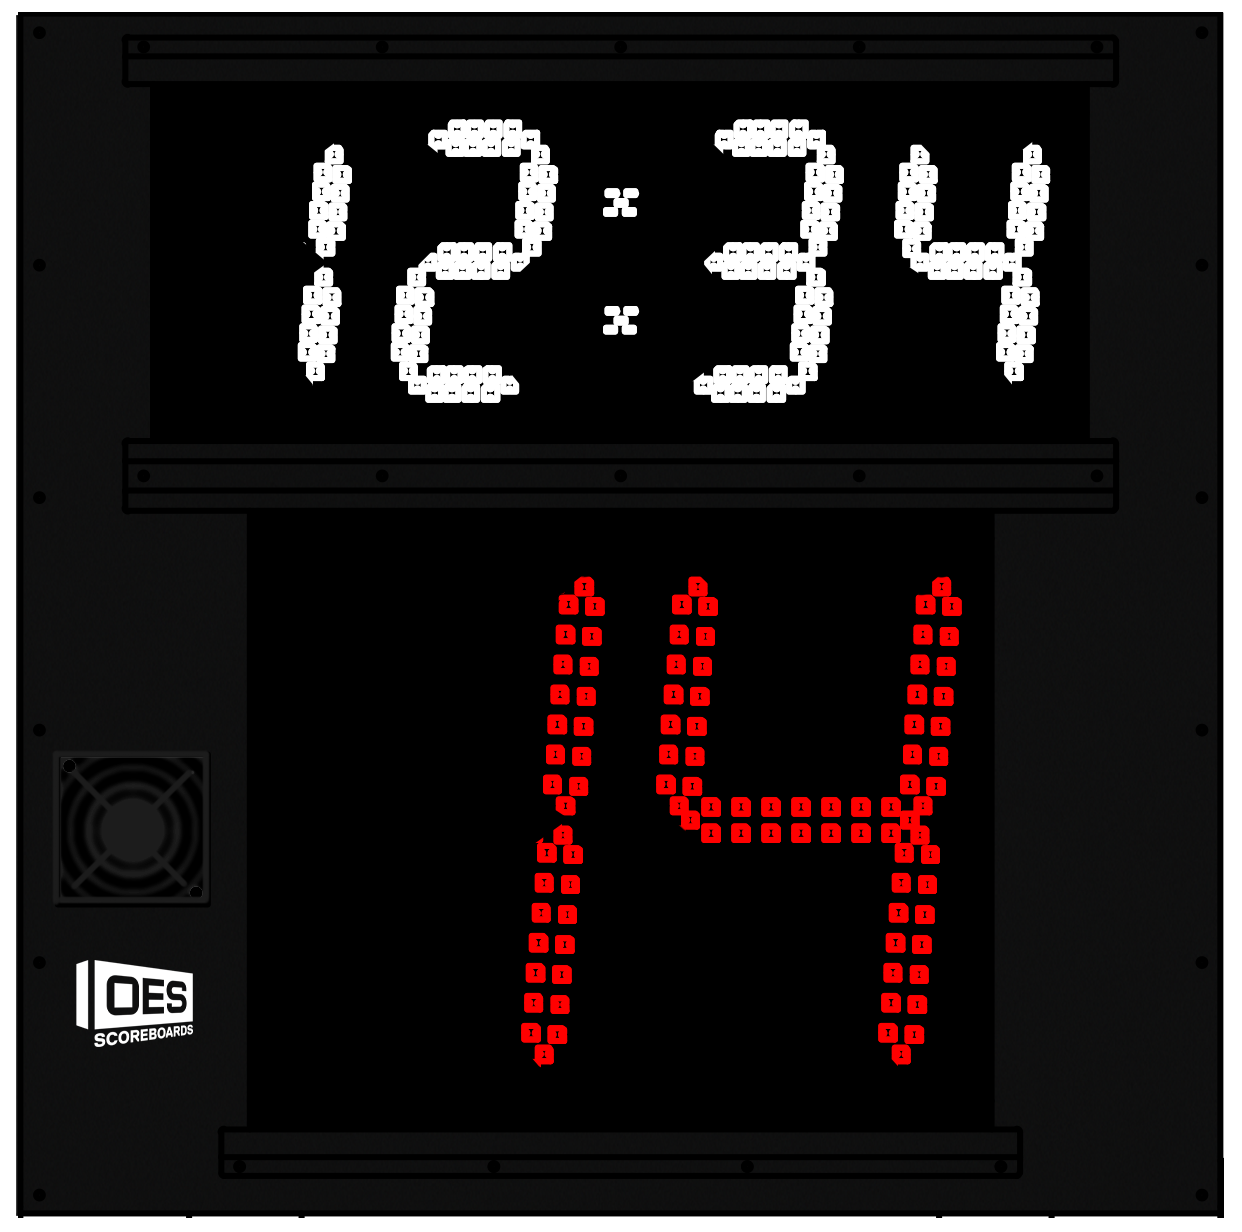 Shot clock with Game time - SHOTS-14G7 - OES Scoreboards